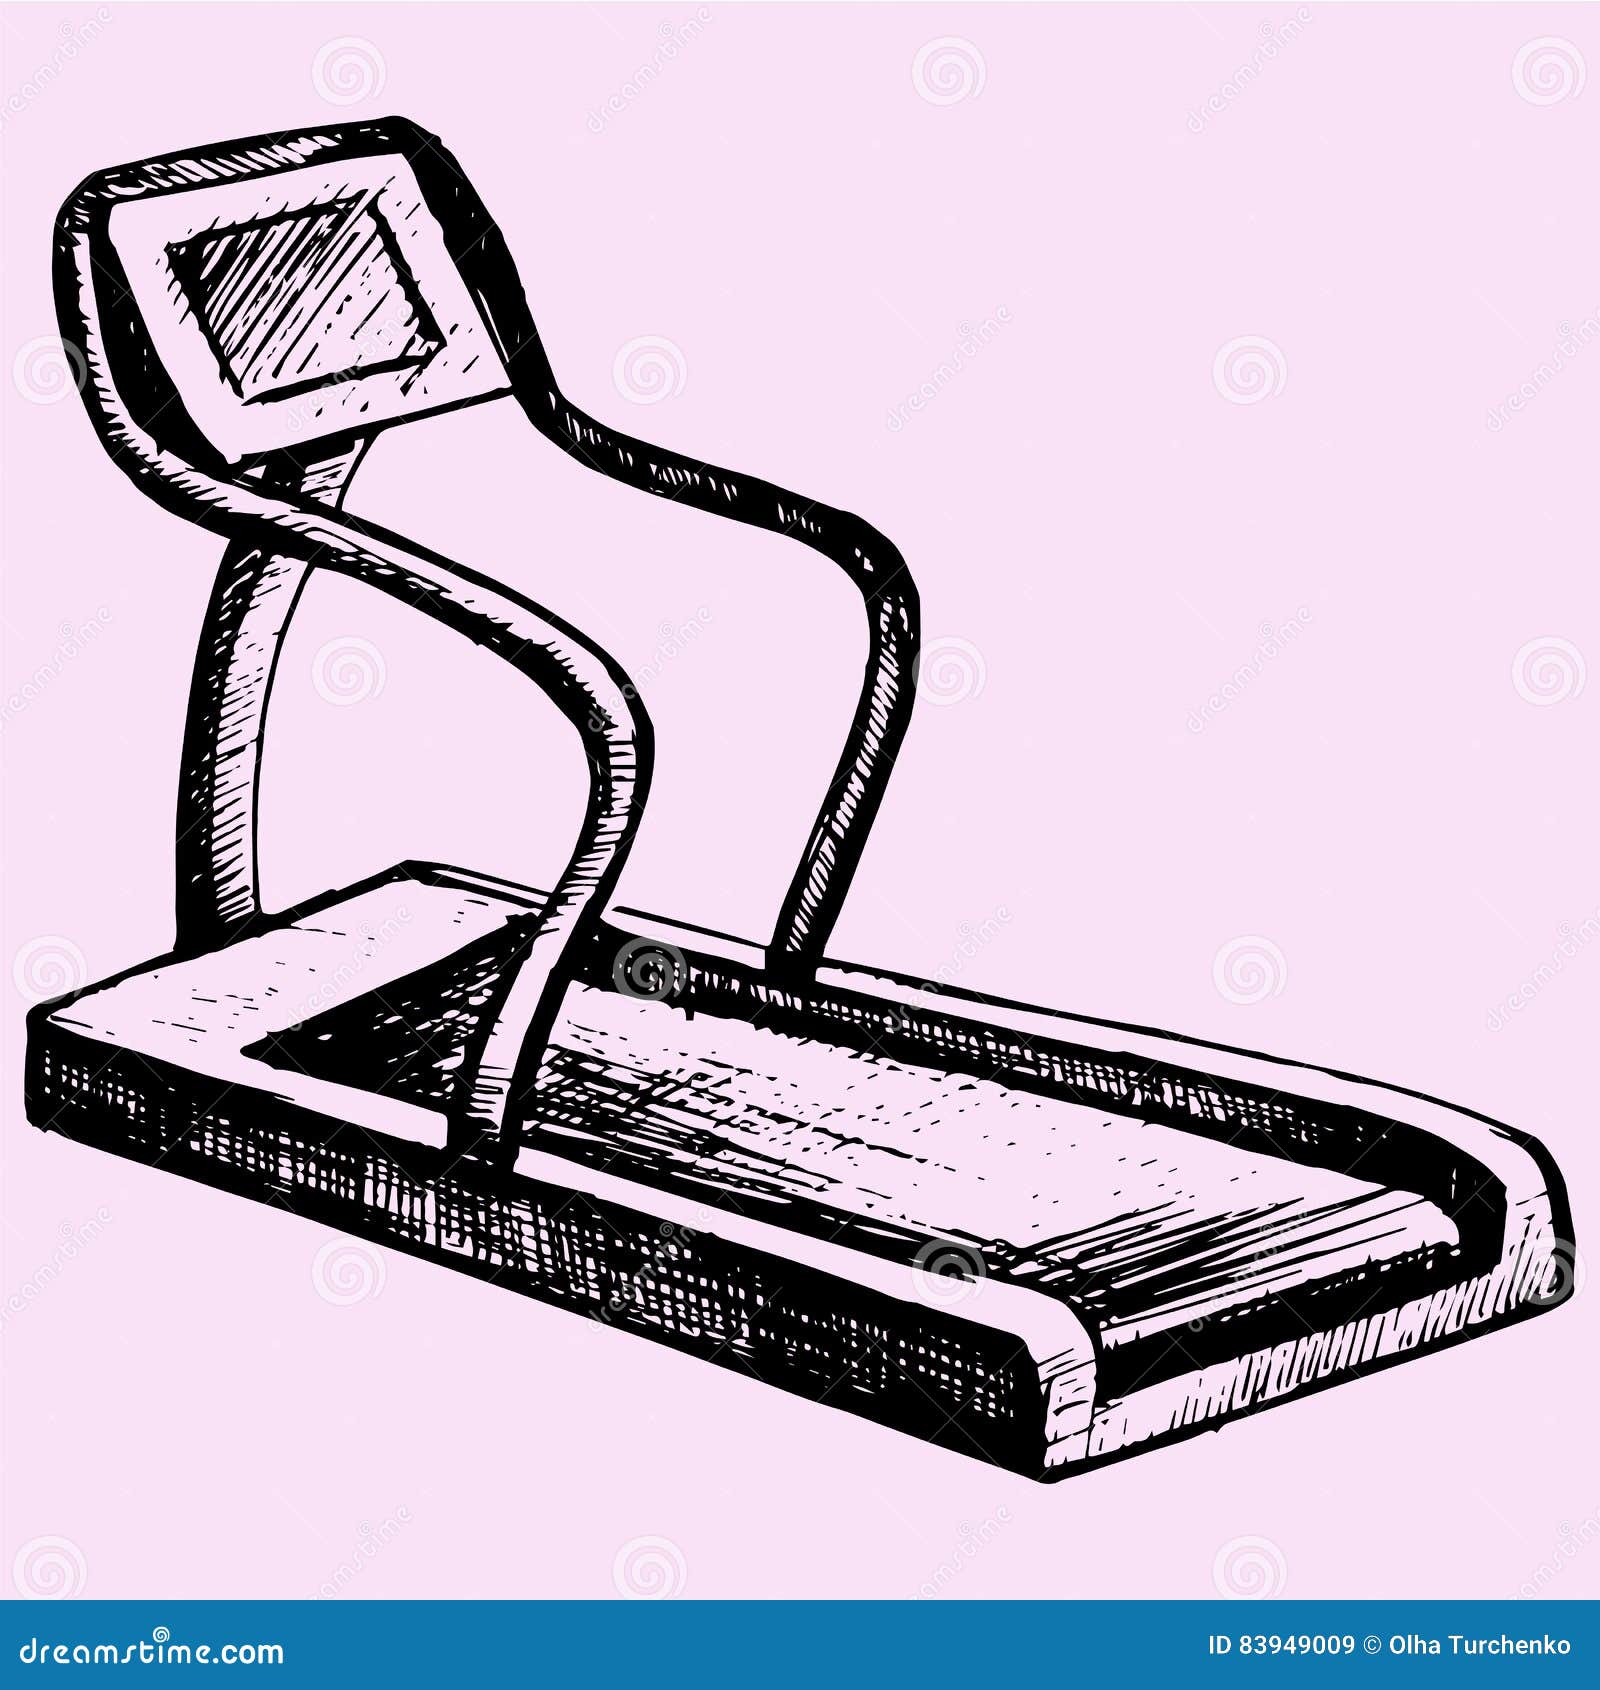 490 Drawing Of A Treadmill Stock Photos Pictures  RoyaltyFree Images   iStock